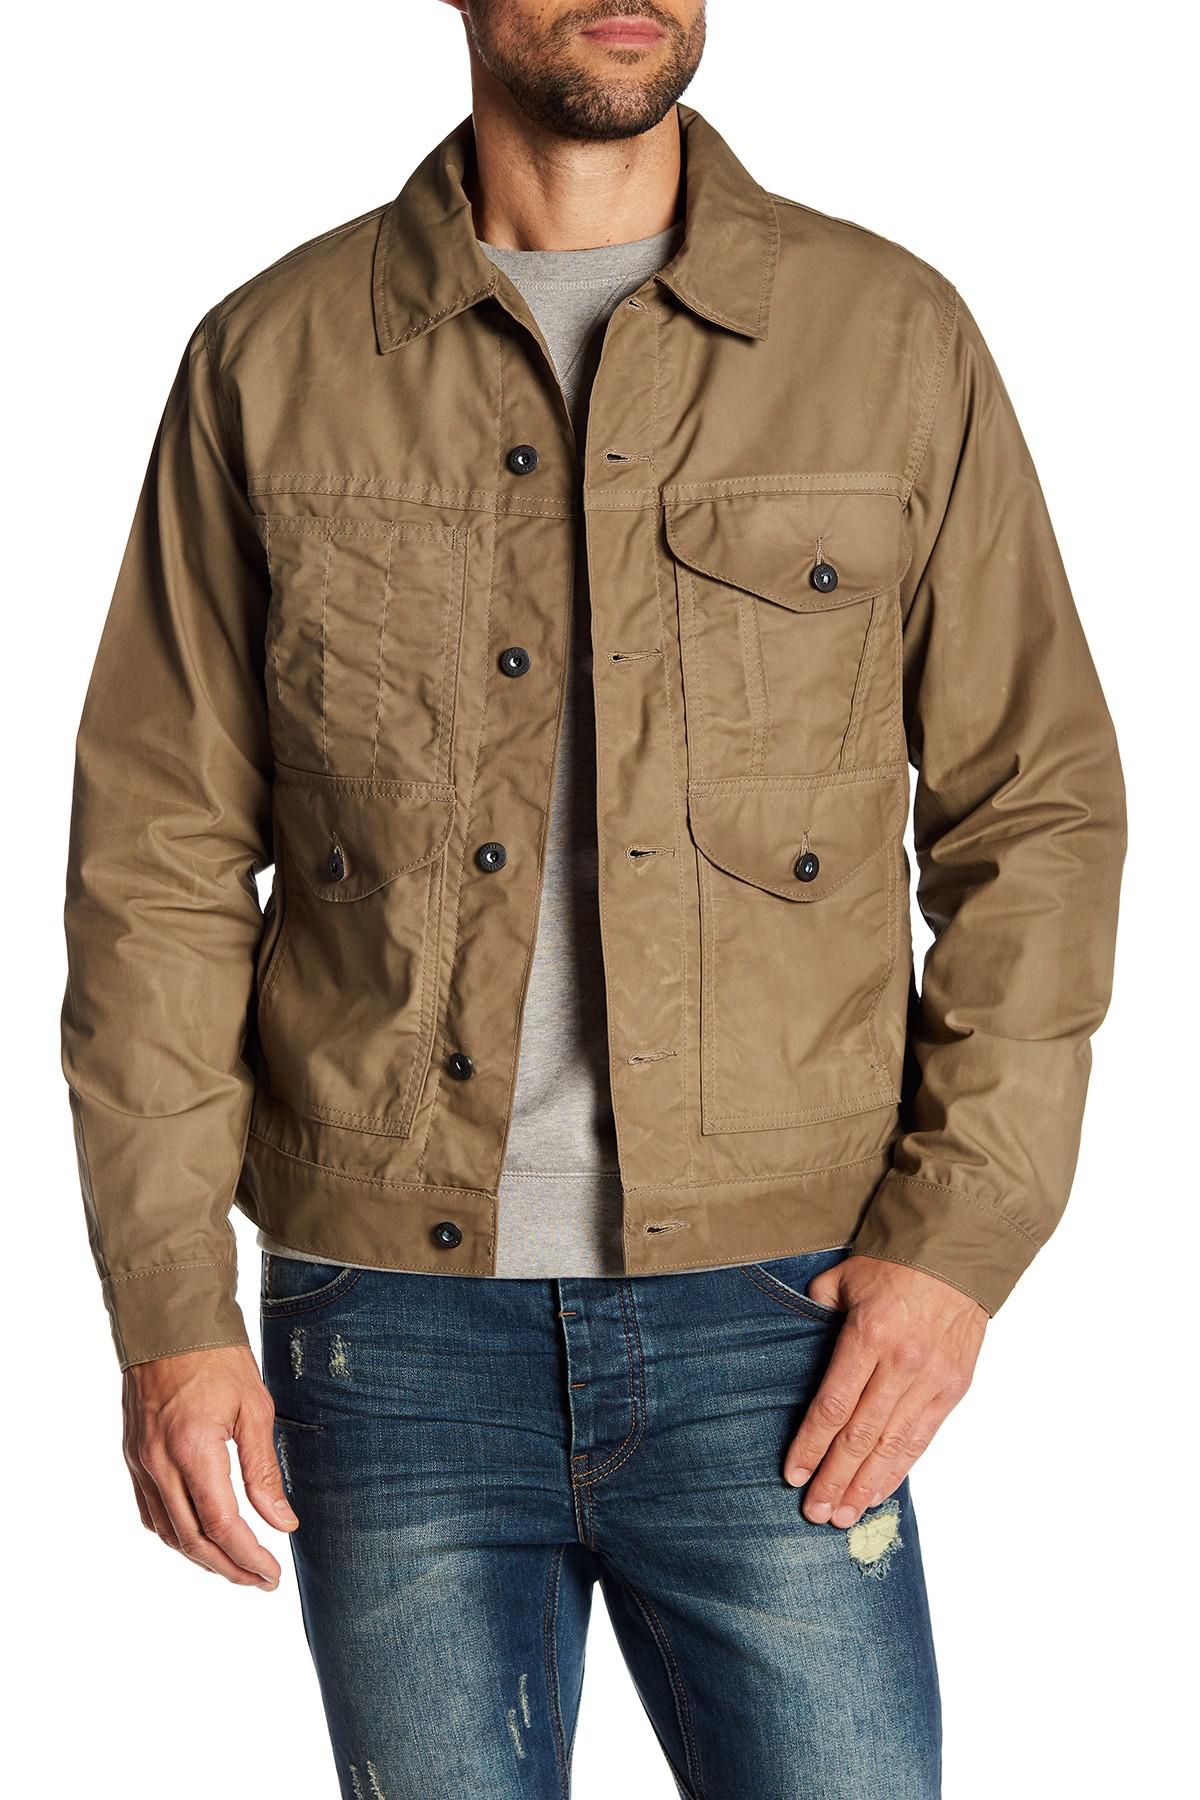 Filson Cotton Lined Cruiser Jacket in Tan (Brown) for Men - Lyst